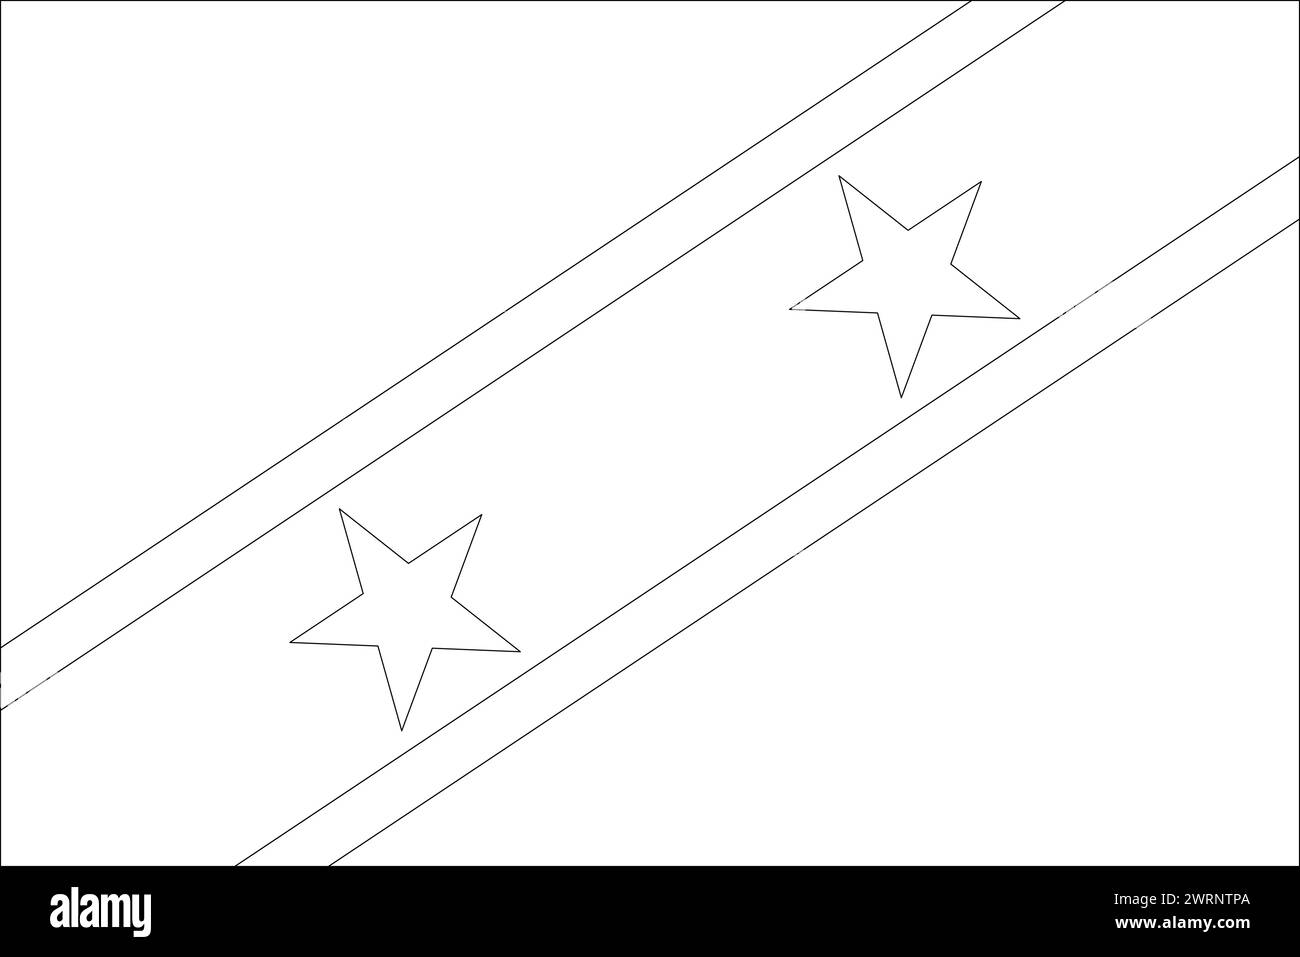 Saint Kitts and Nevis flag - thin black vector outline wireframe isolated on white background. Ready for colouring. Stock Vector